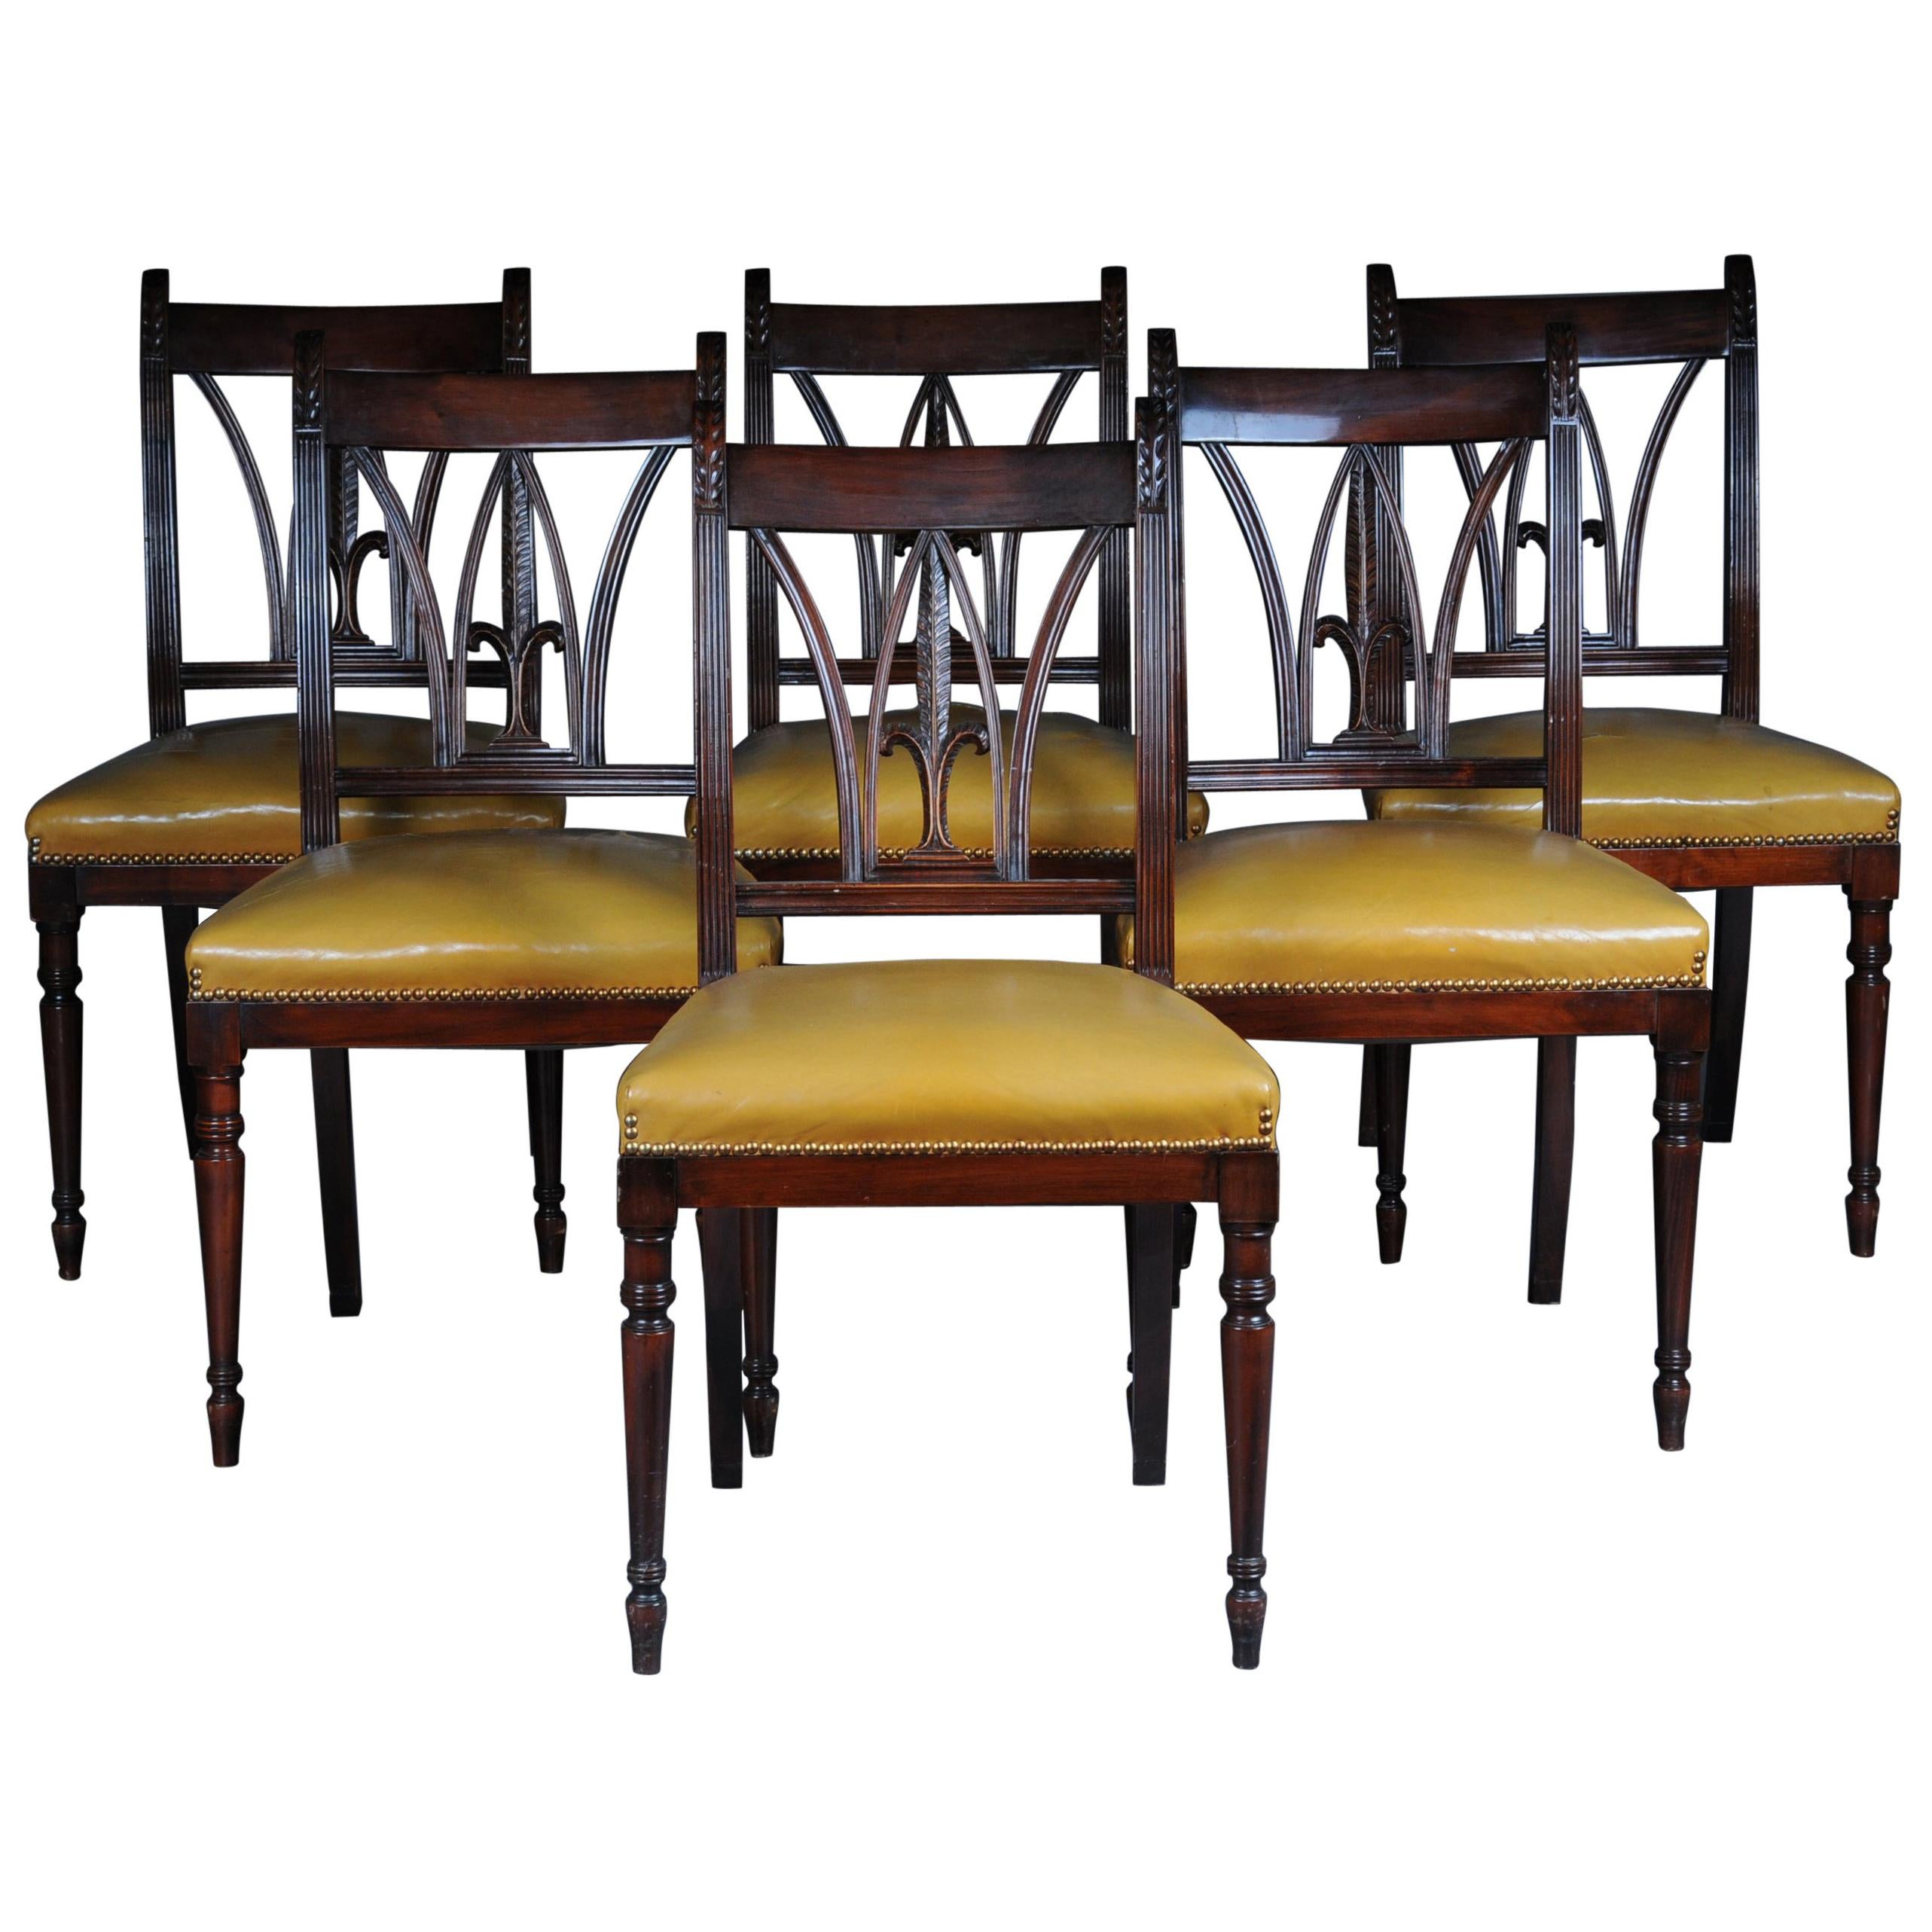 Set of Six Chairs England Victorian 20th Century, Mahogany, Leather